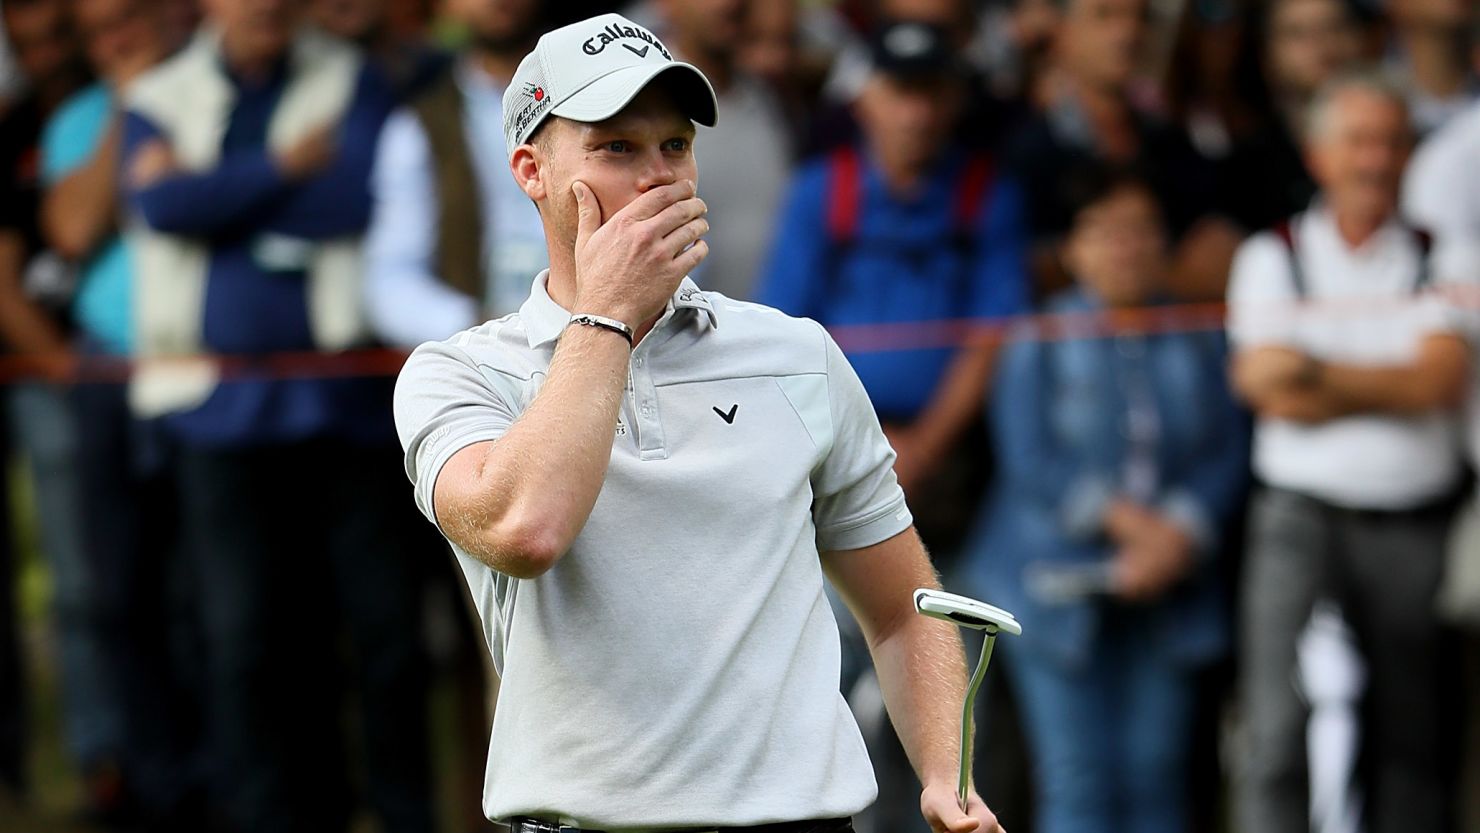 Danny Willett has apologized for an article written by his brother prior to this week's Ryder Cup.